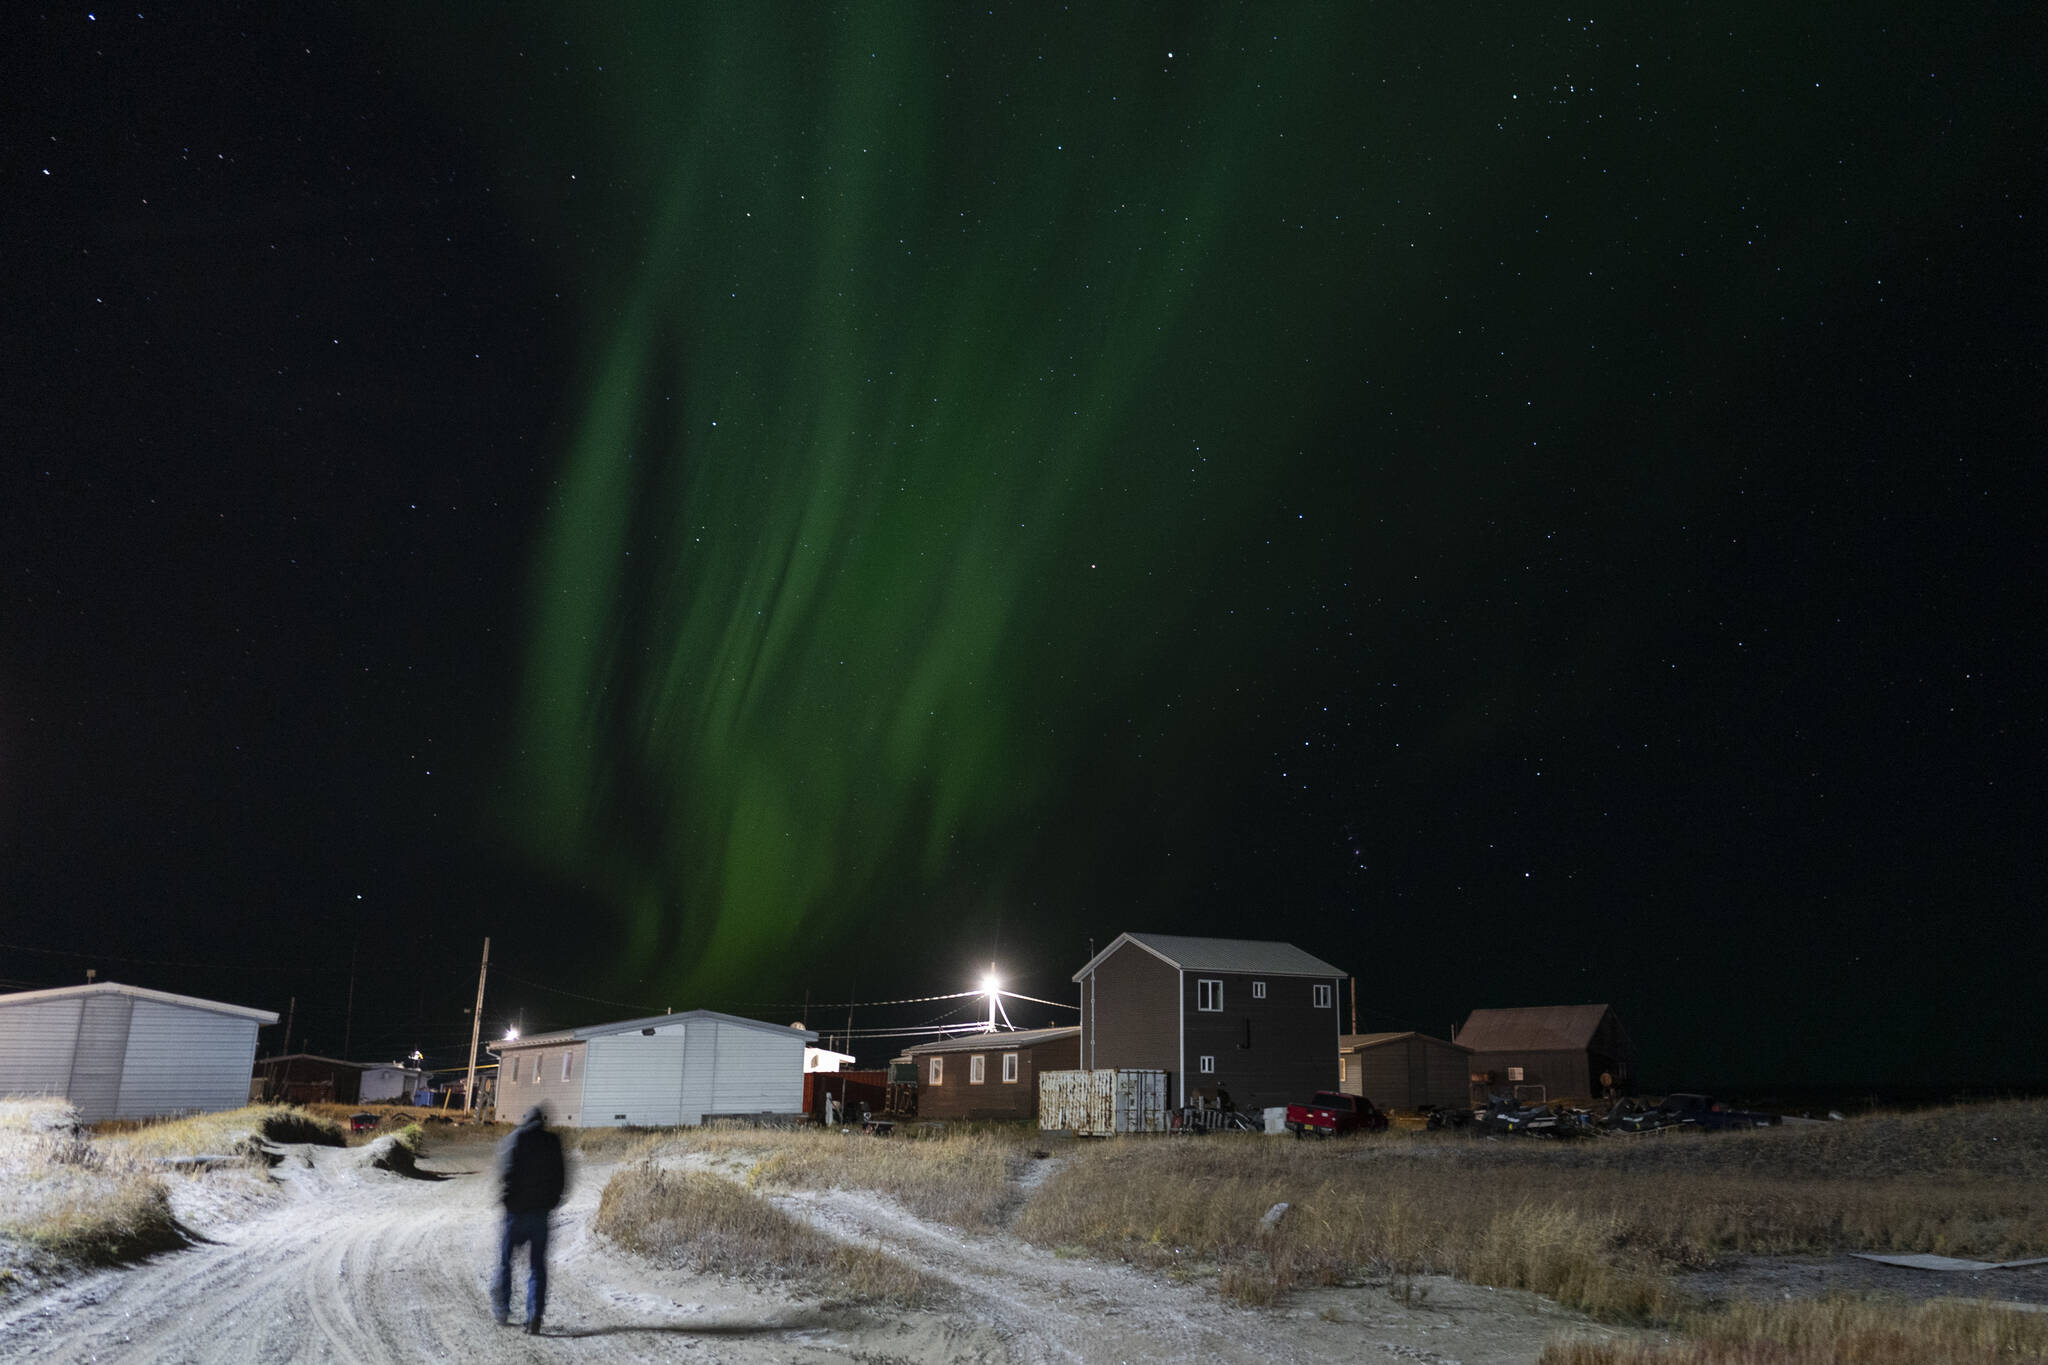 The northern lights appear over Shishmaref, Alaska, Sunday, Oct. 2, 2022. Rising sea levels, flooding, increased erosion and loss of protective sea ice and land have led residents of this island community to vote twice to relocate. But more than six years after the last vote, Shishmaref remains in the same place because the relocation is too costly. (AP Photo/Jae C. Hong)